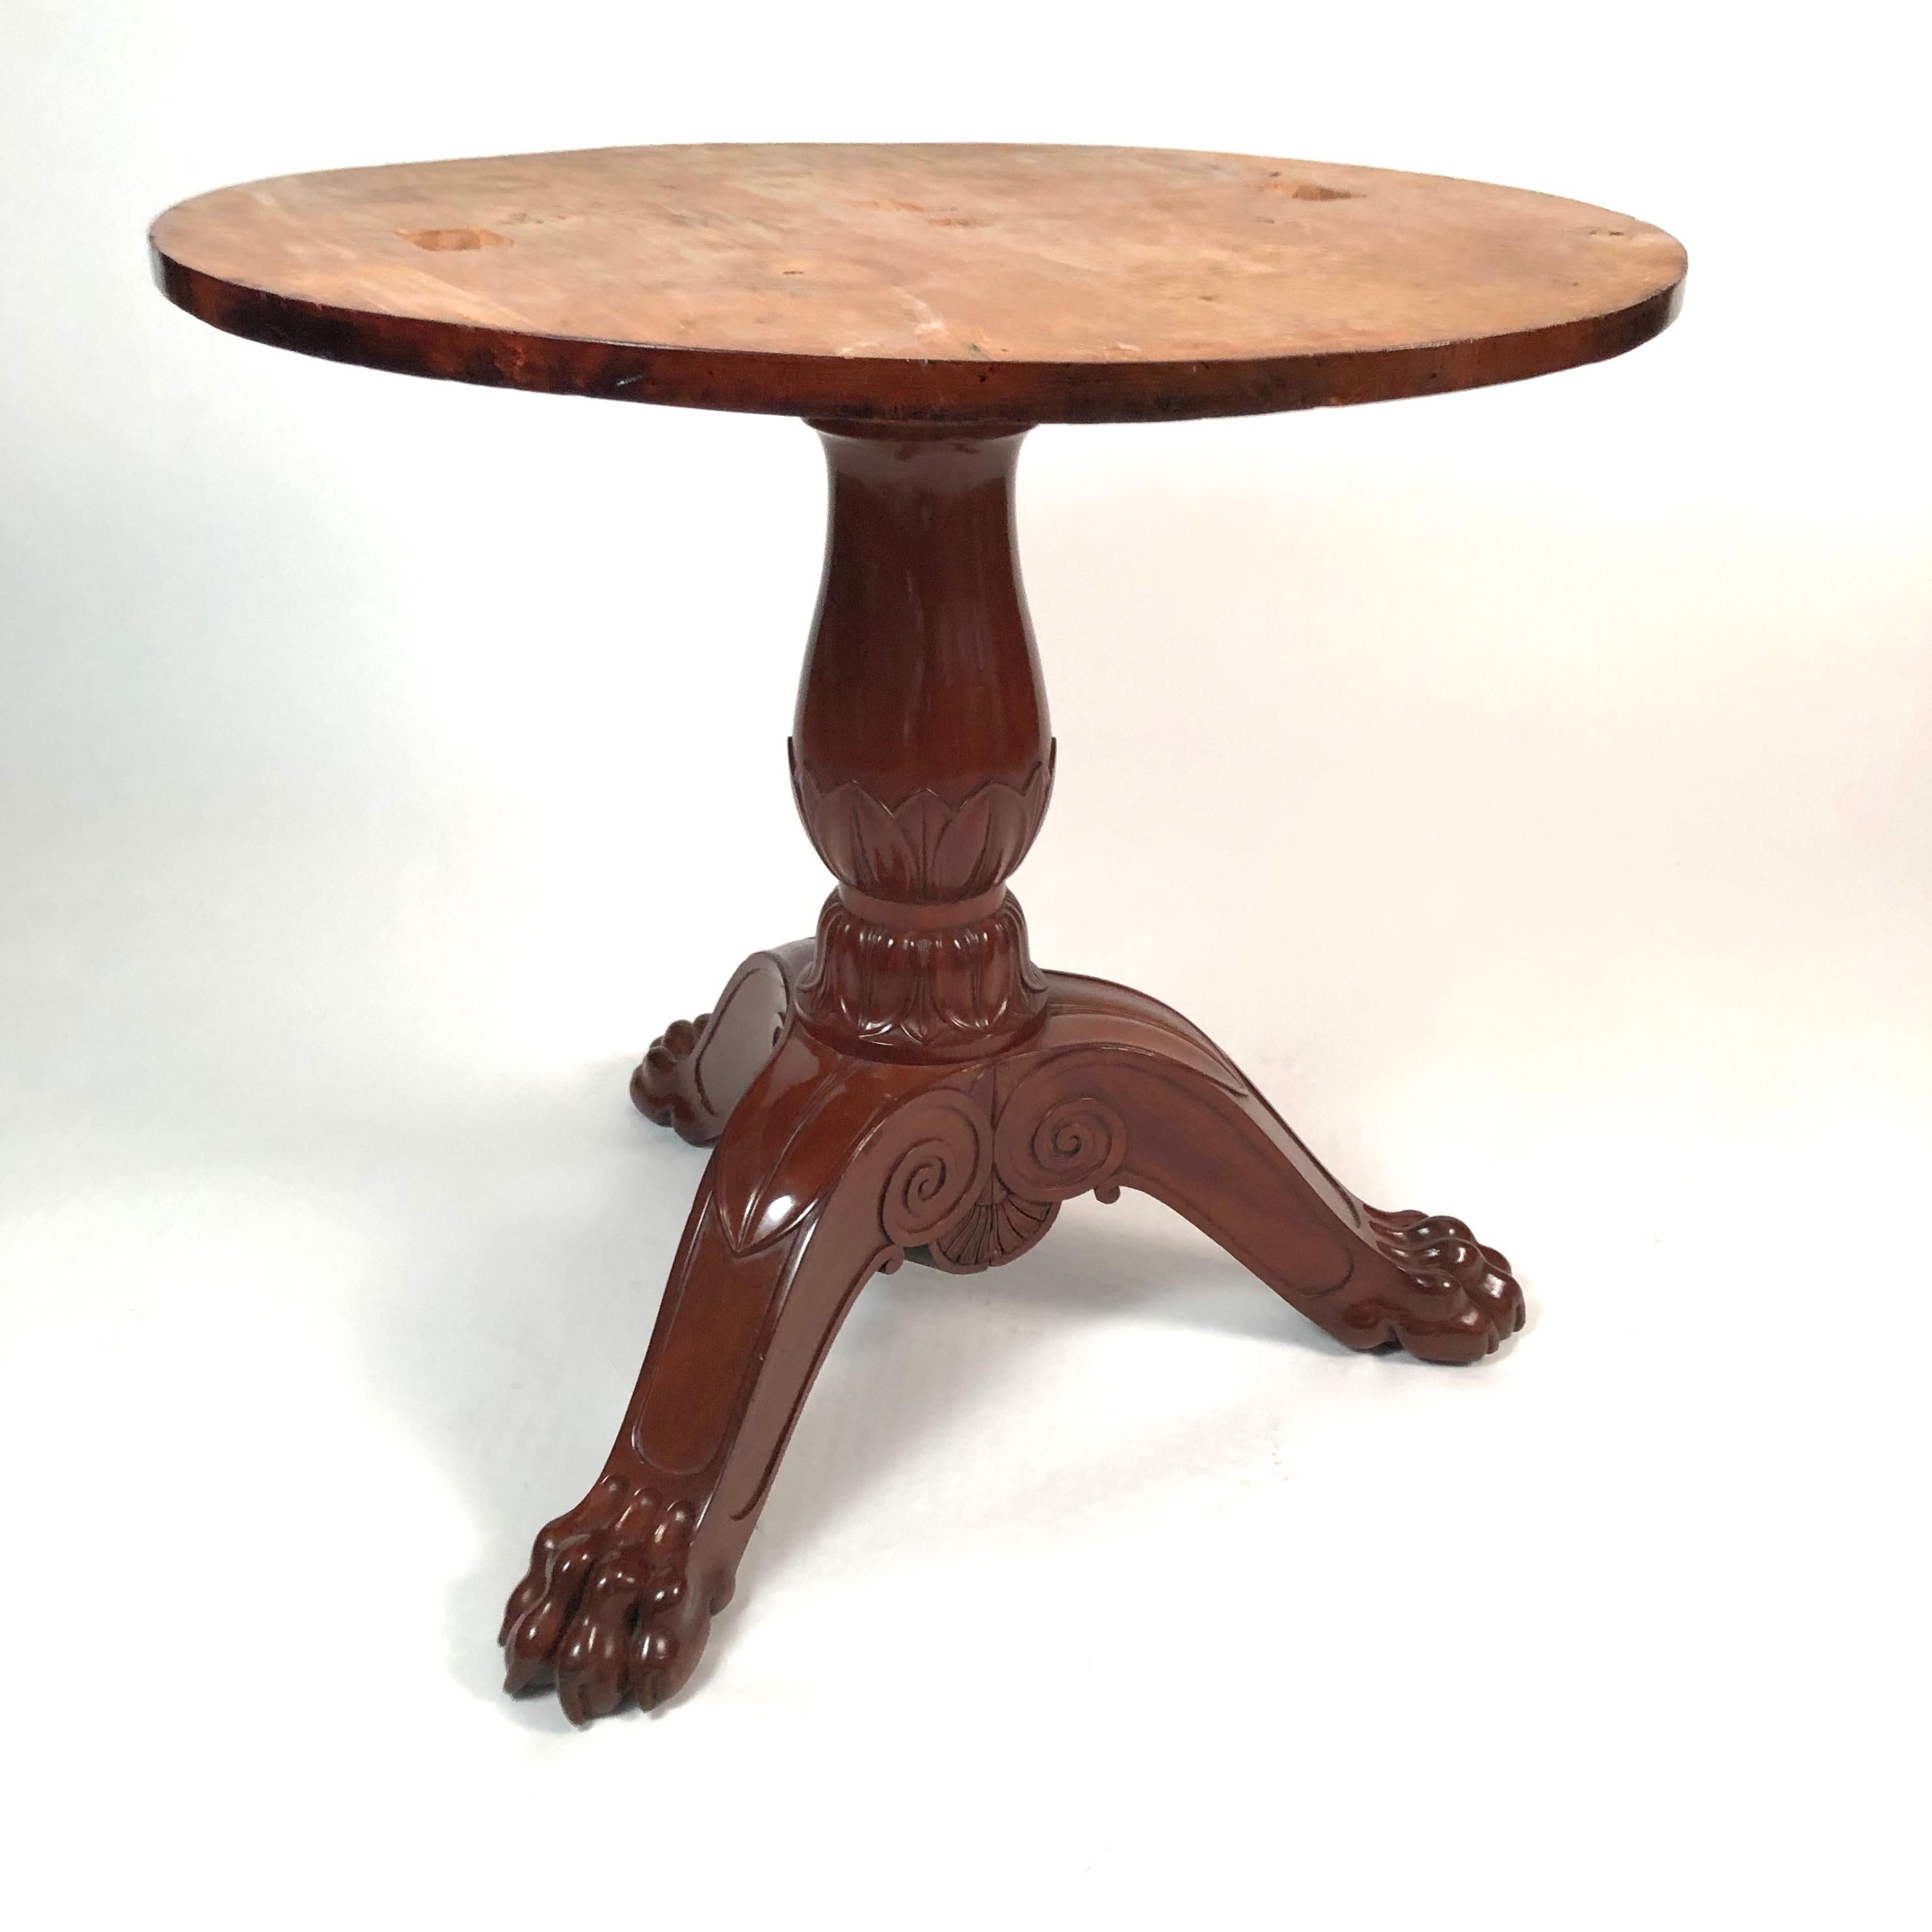 Carved French Empire Period Center Table in Mahogany with Stone Top by Jacob